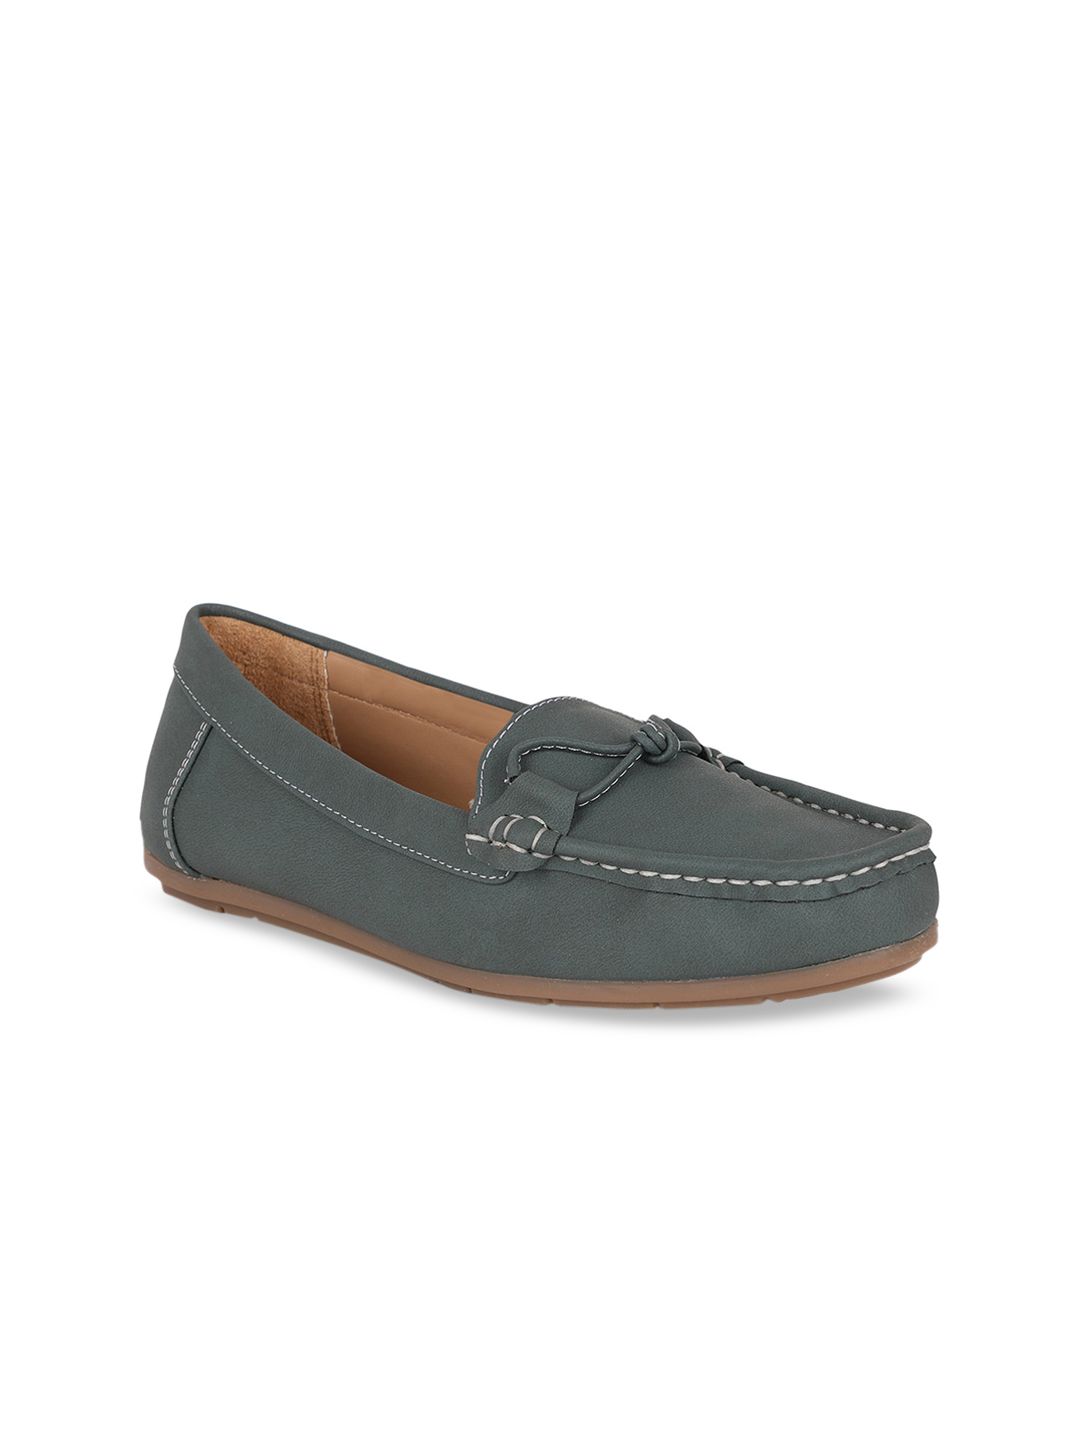 Bata Women Grey Loafers Casual Shoes Price in India